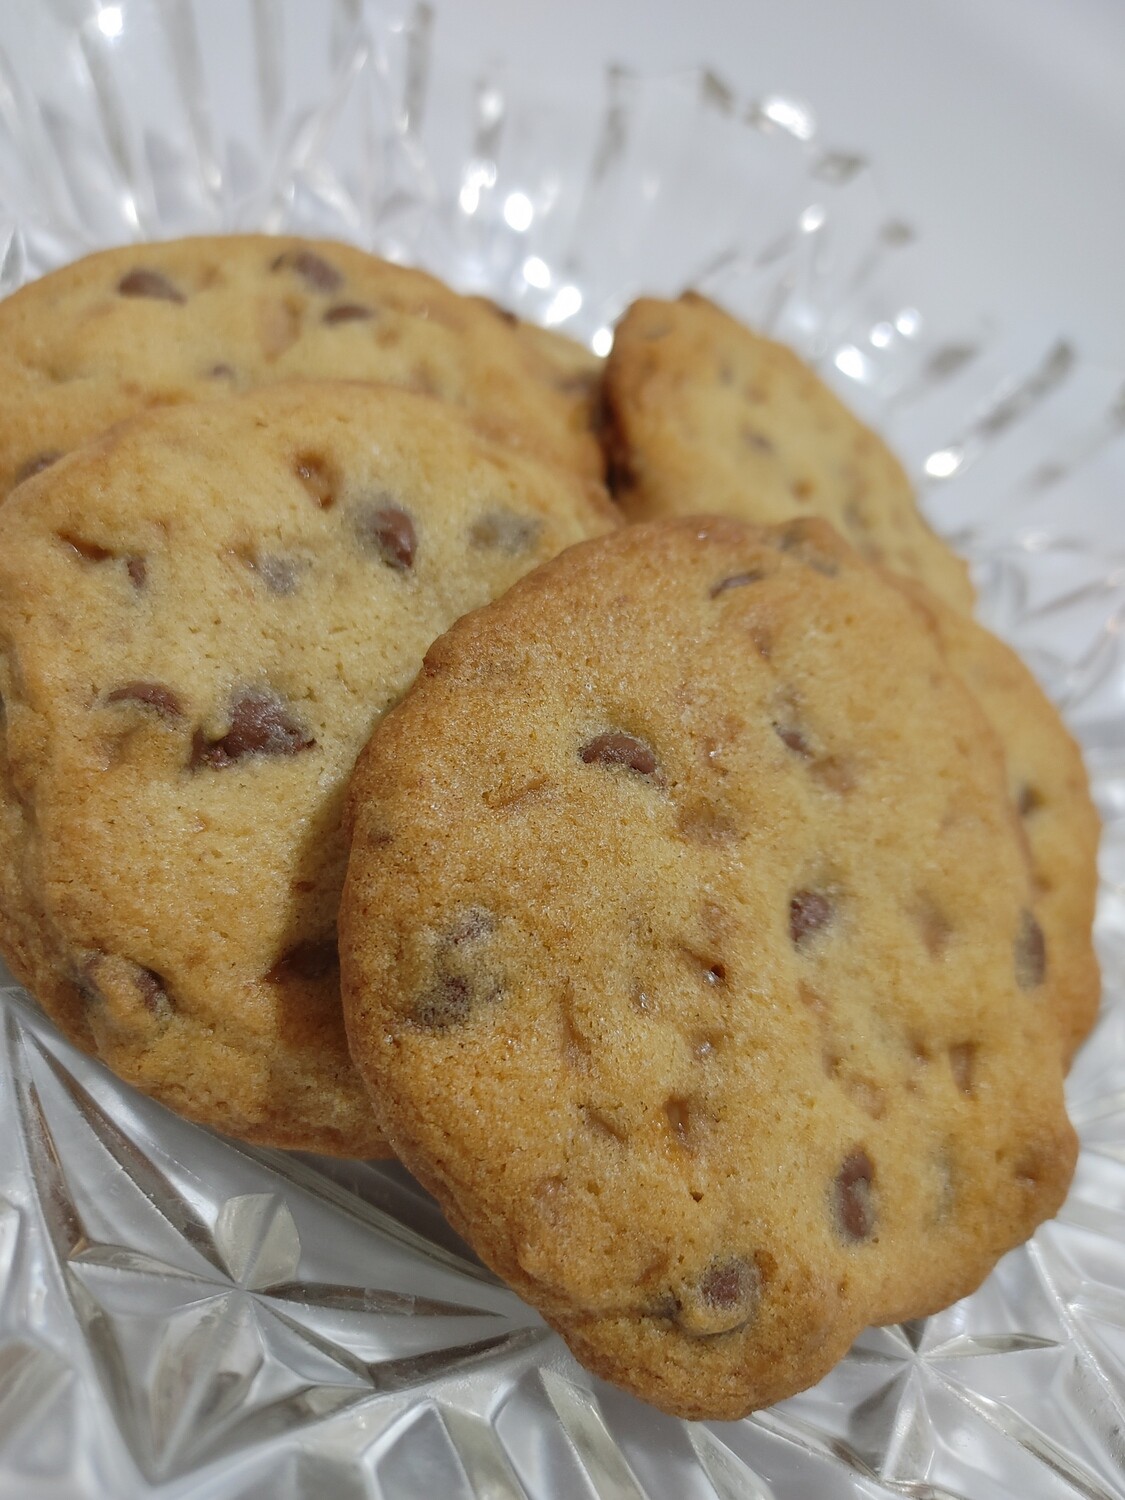 Toffee Chocolate Chip Cookies, 12 Count